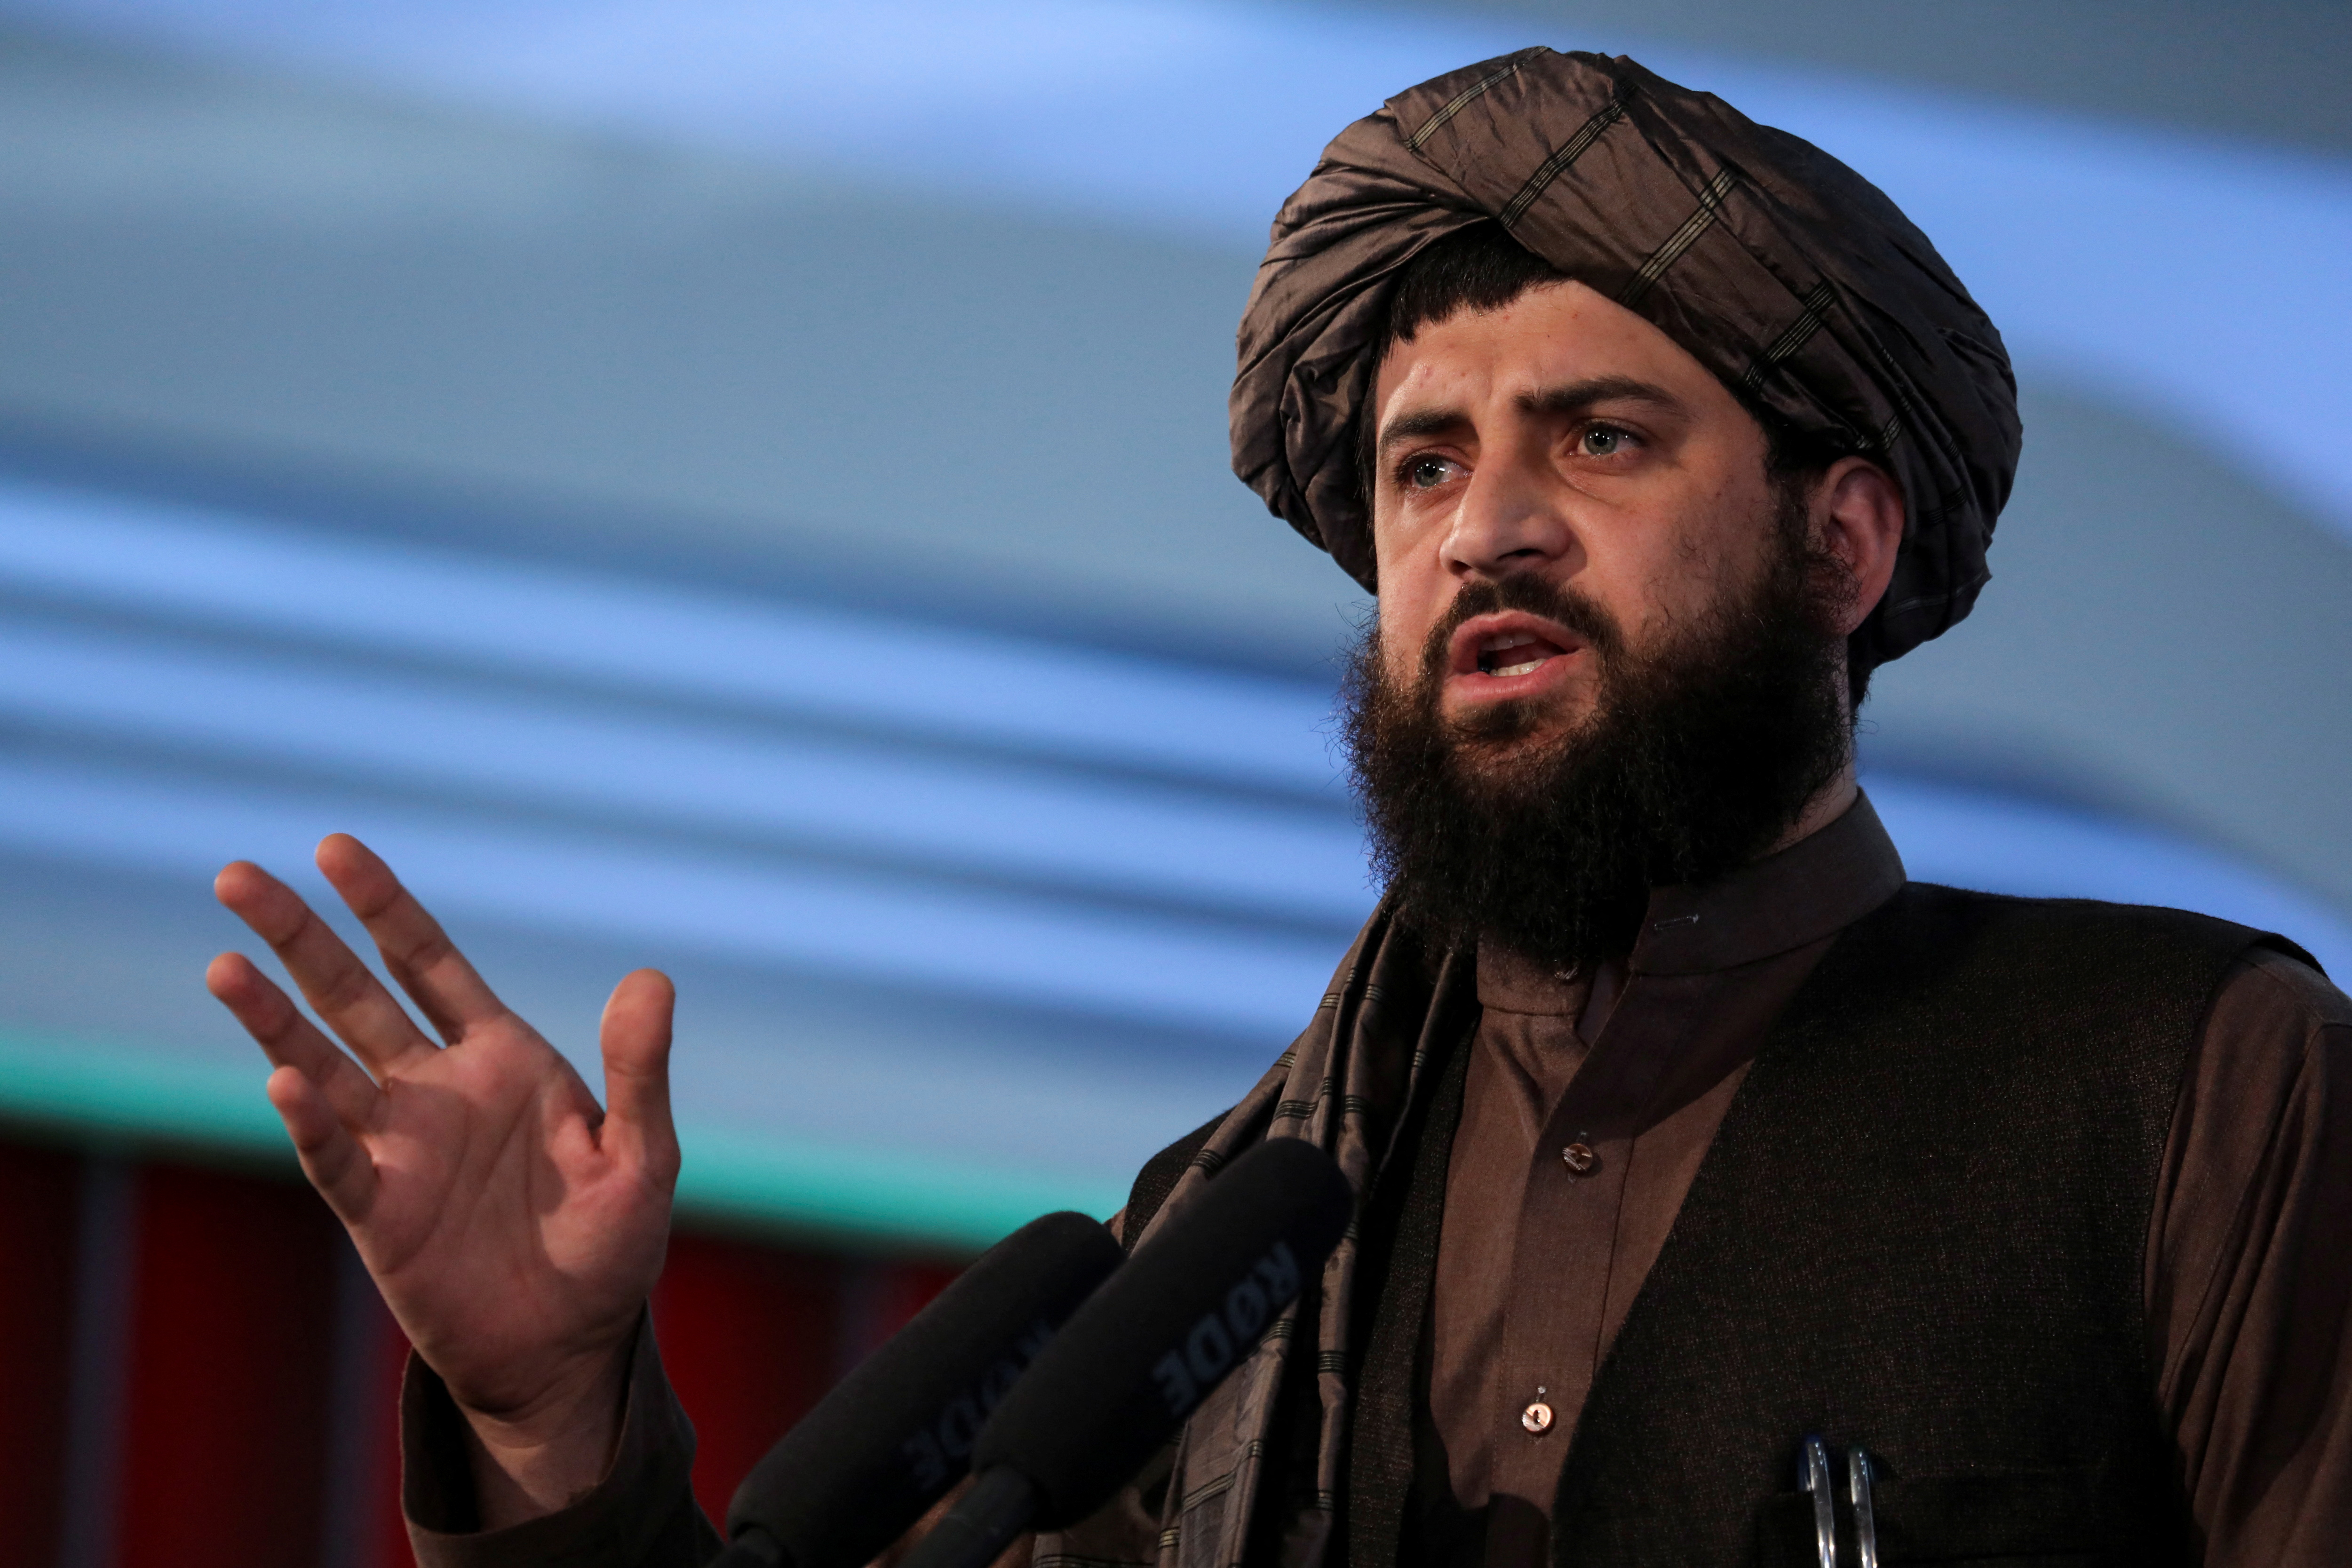 Afghan Taliban's Minister of Defense Mullah Mohammad Yaqoob speaks during the death anniversary of Mullah Mohammad Omar, the late leader and founder of the Taliban, in Kabul